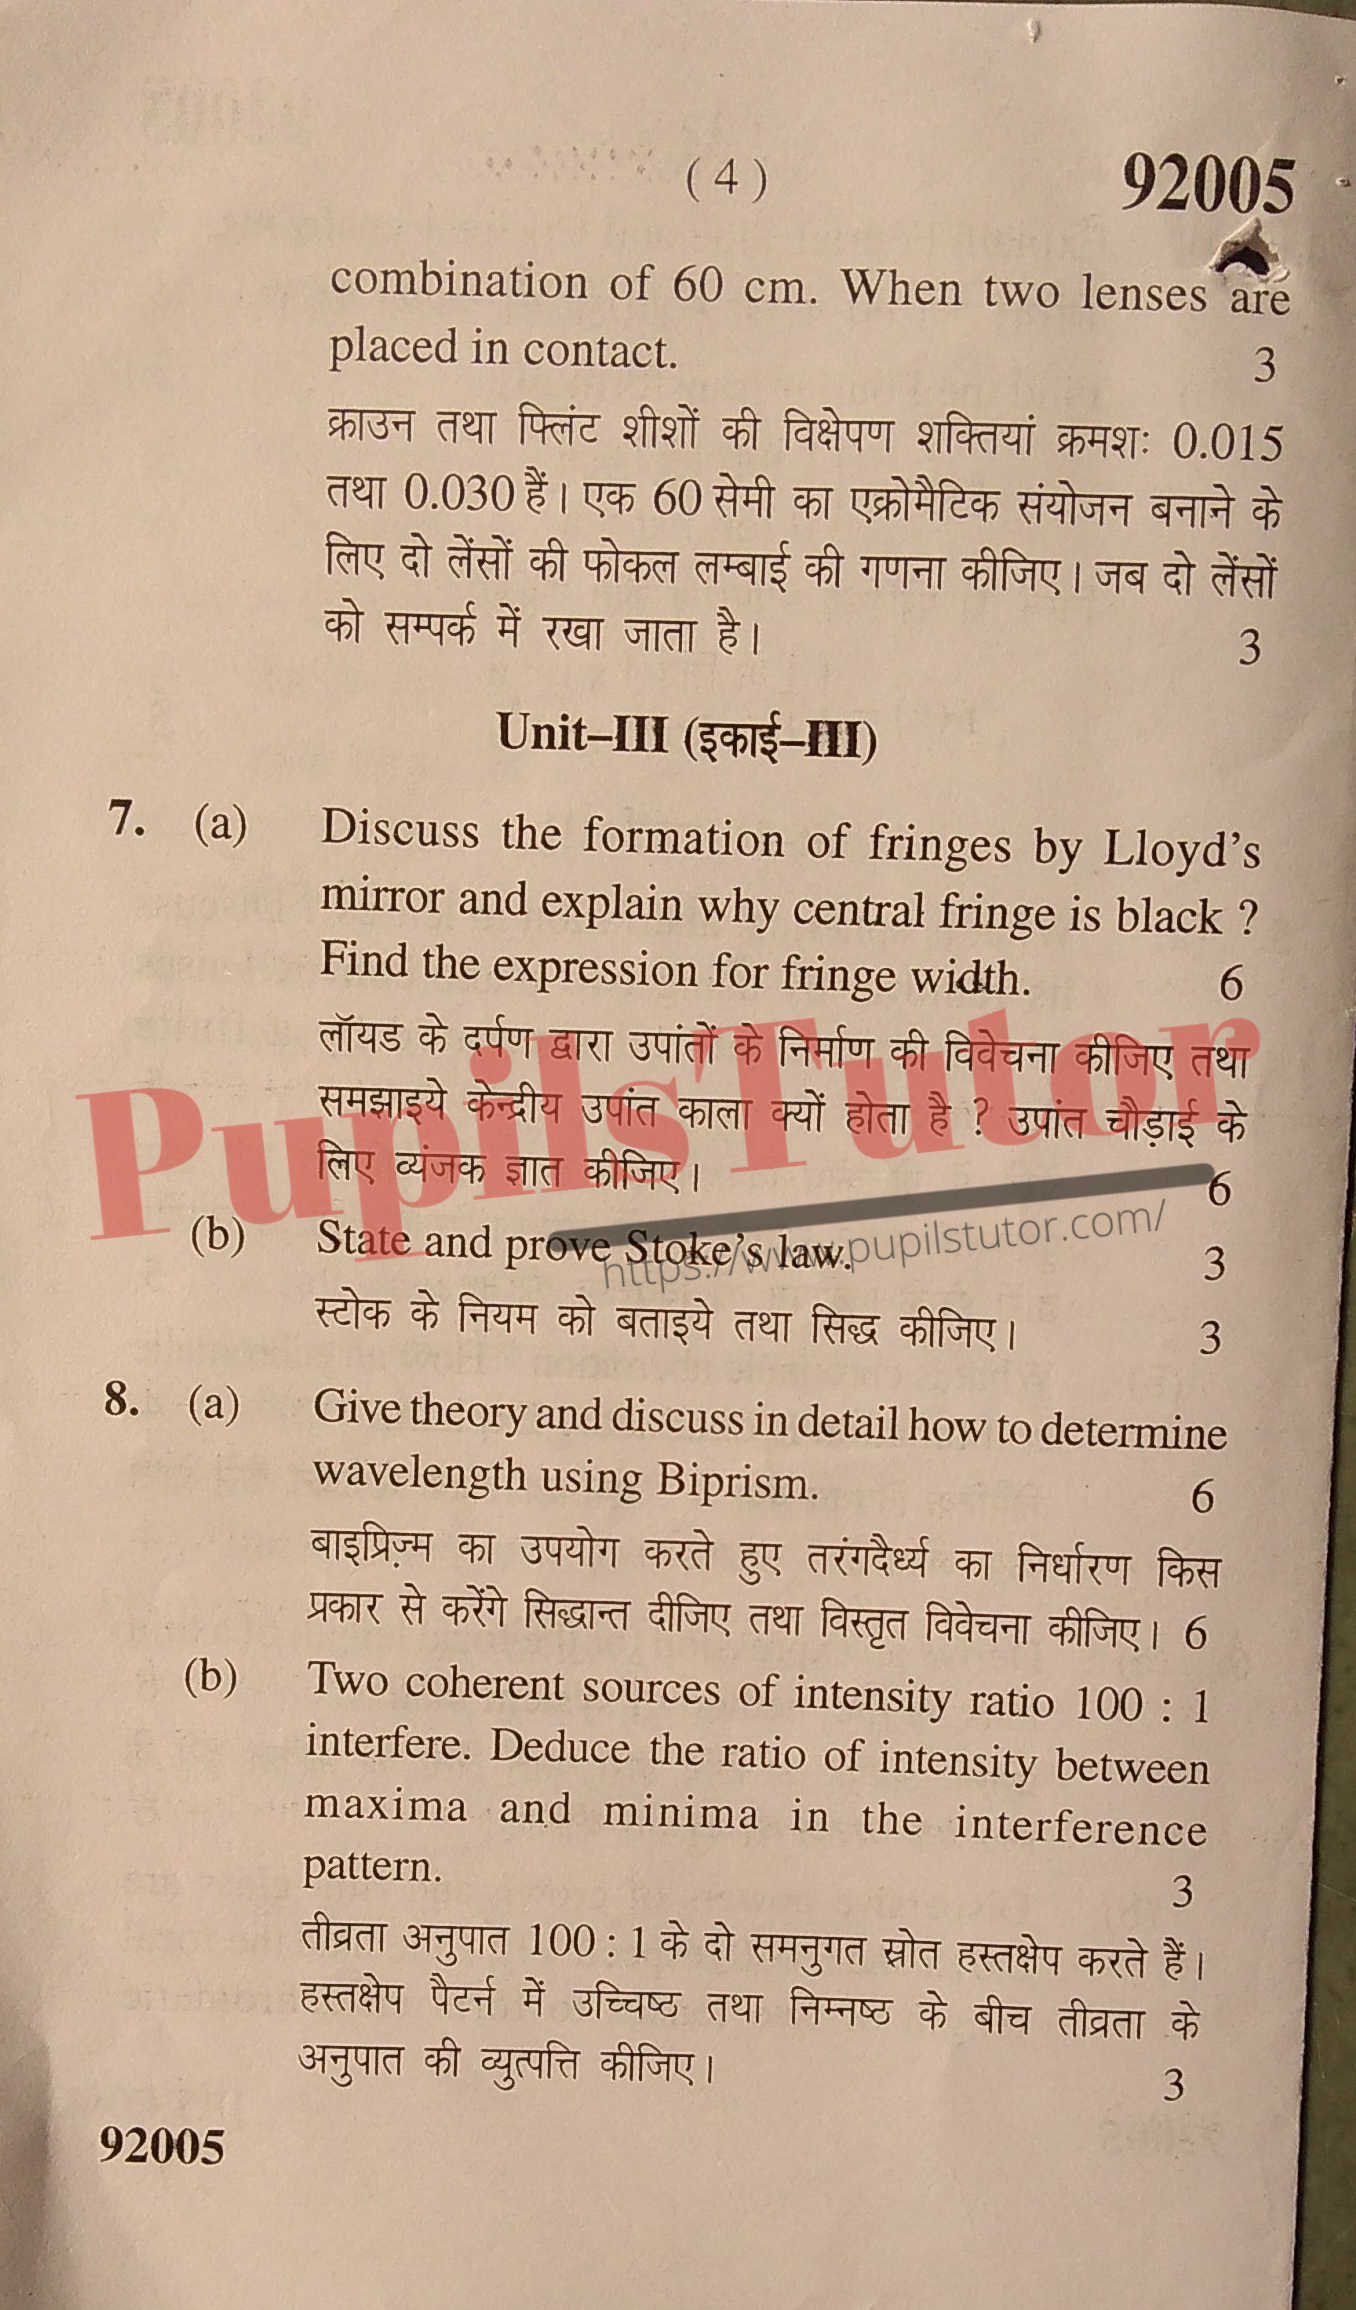 MDU (Maharshi Dayanand University, Rohtak Haryana) Pass Course (B.Sc. [Physics] – Bachelor of Science) Optics Important Questions Of November, 2015 Exam PDF Download Free (Page 4)